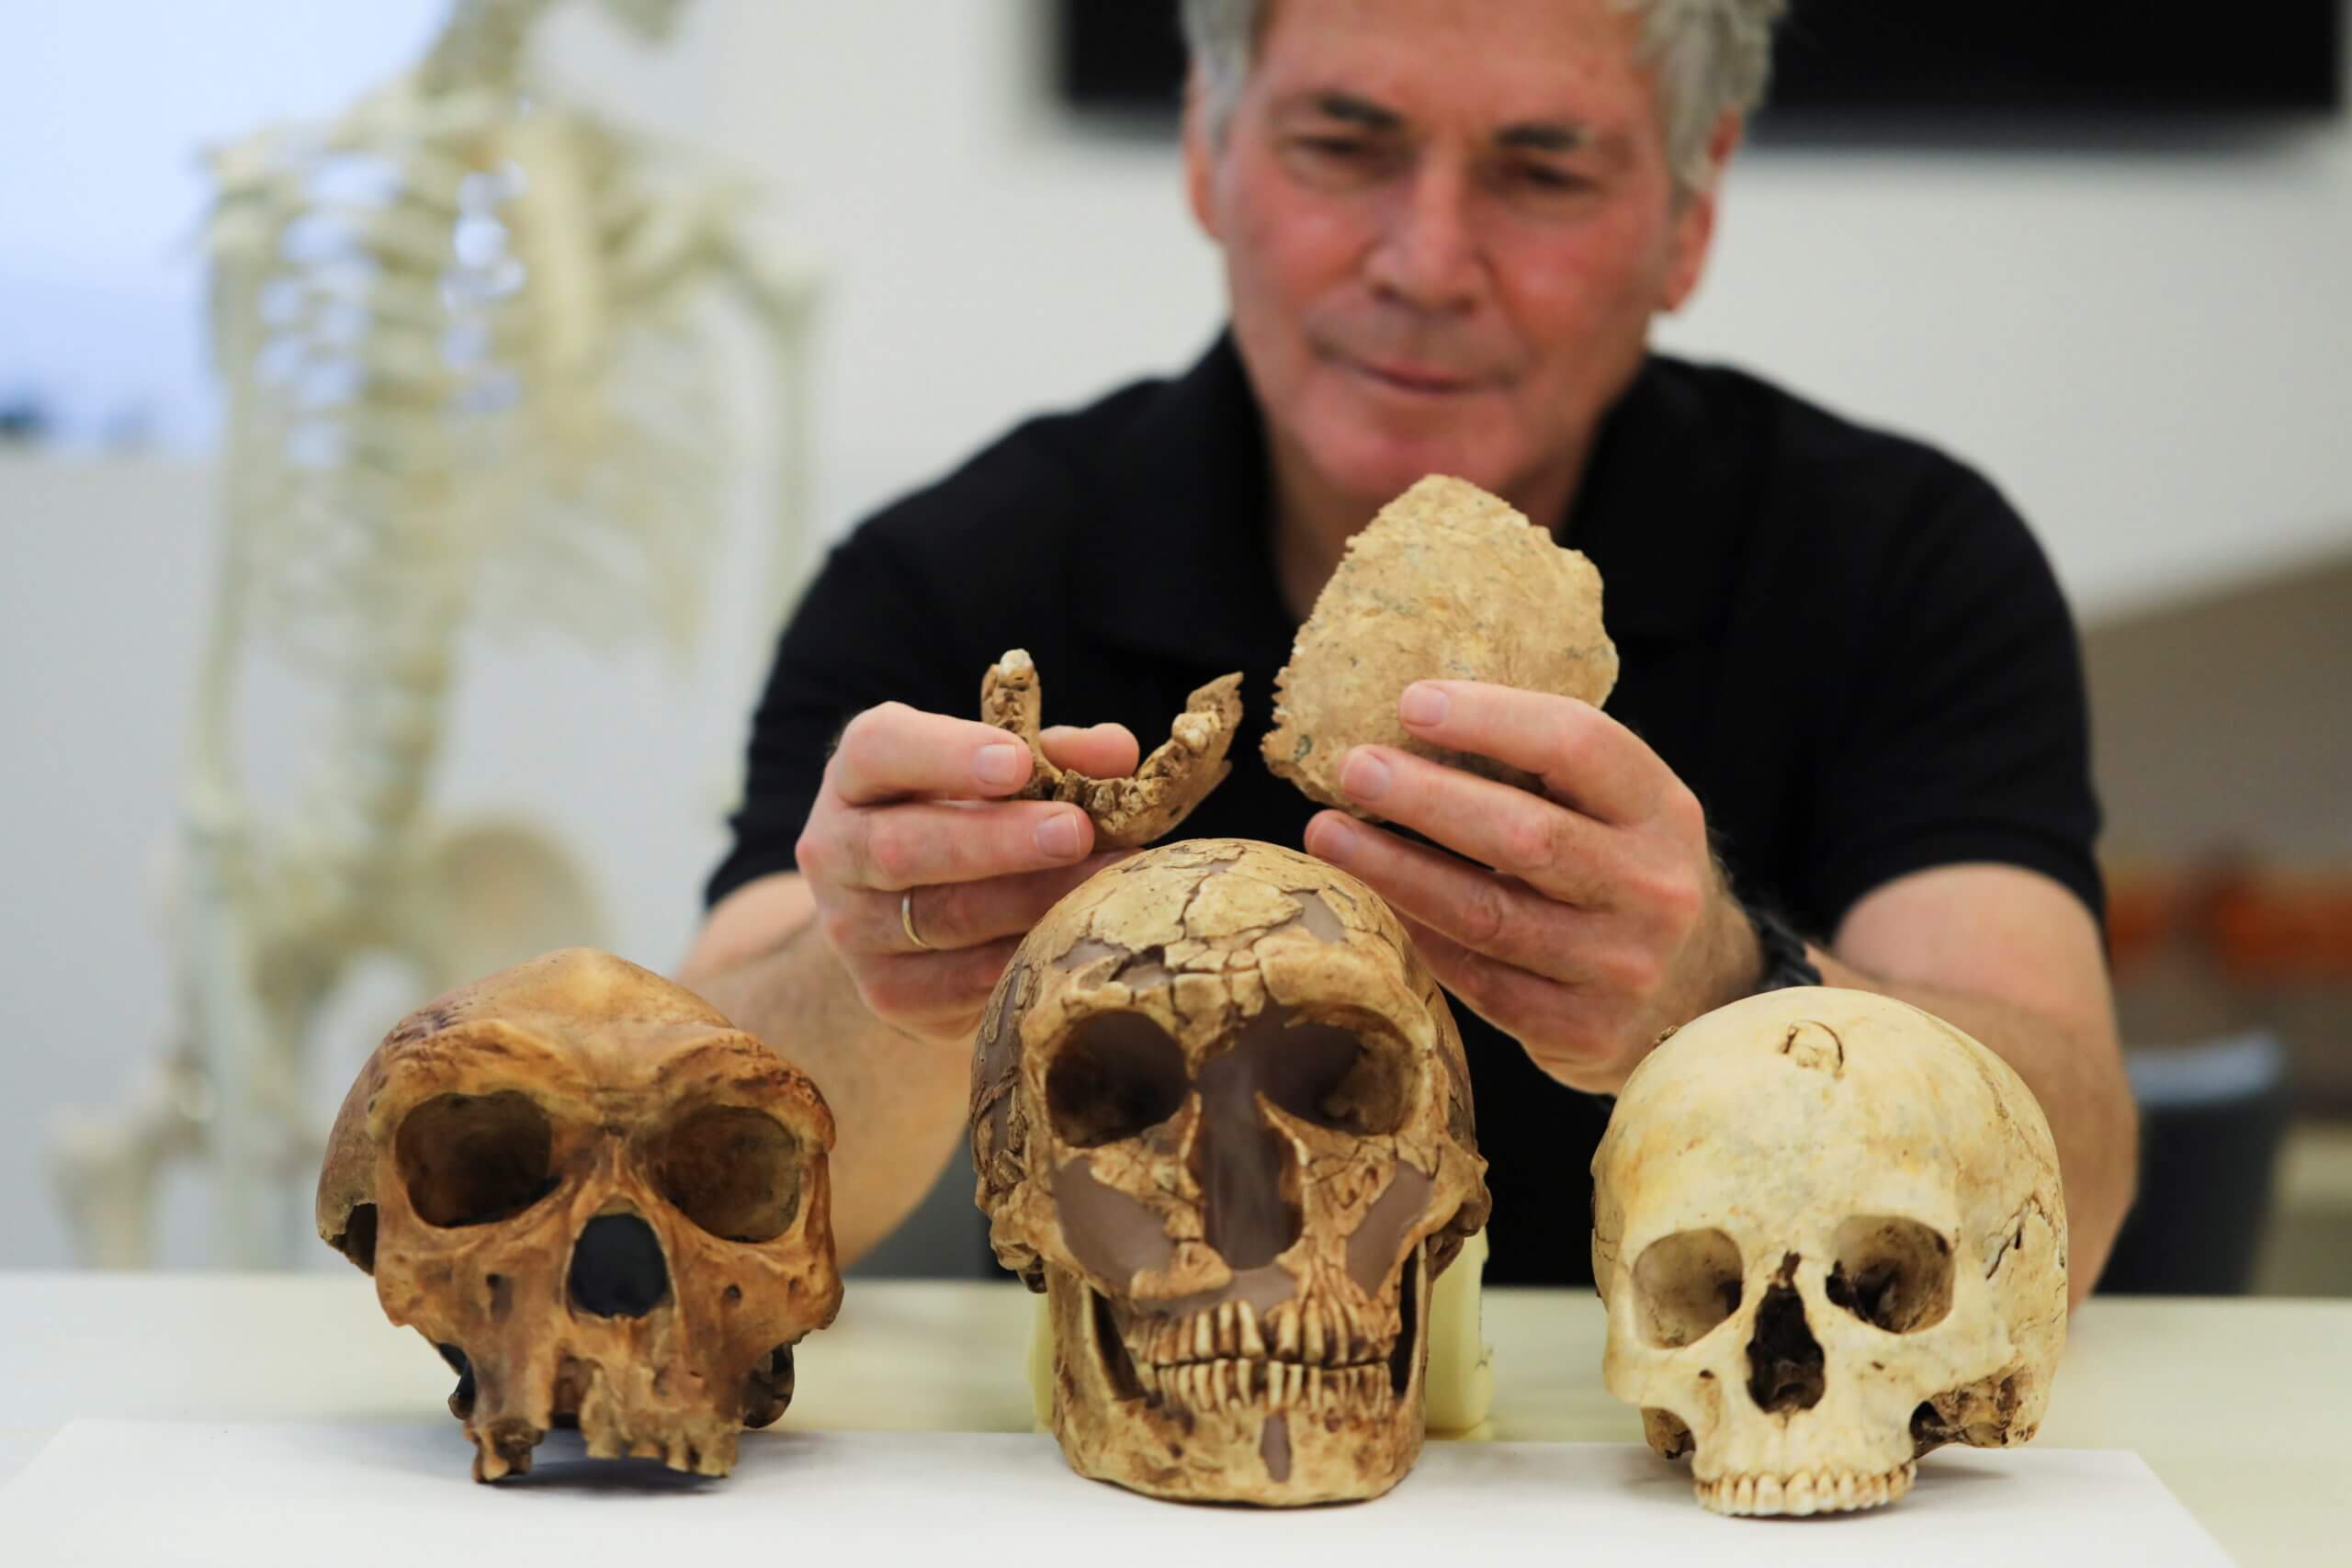 Research team discovers Bones of new type of early human in Israel